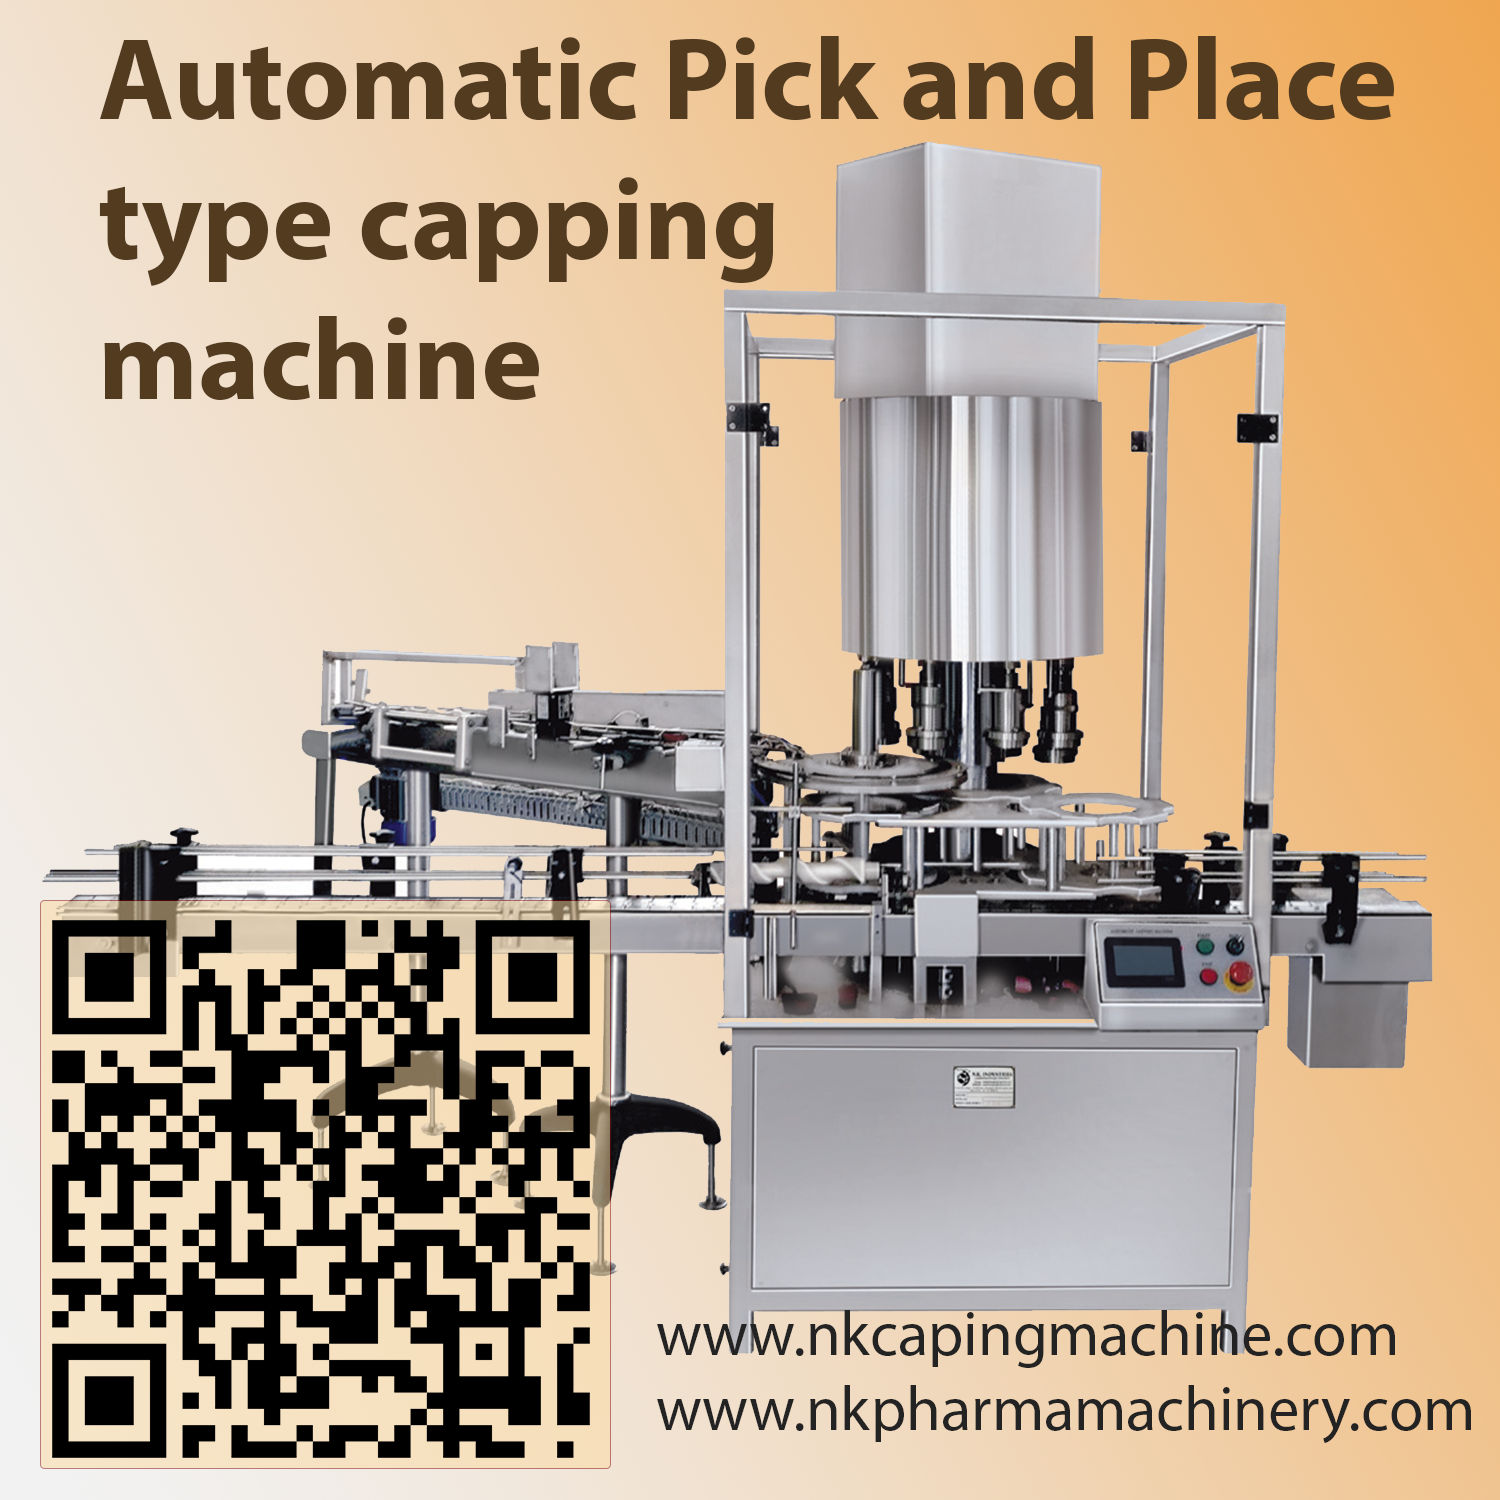 Pick and place capping machine